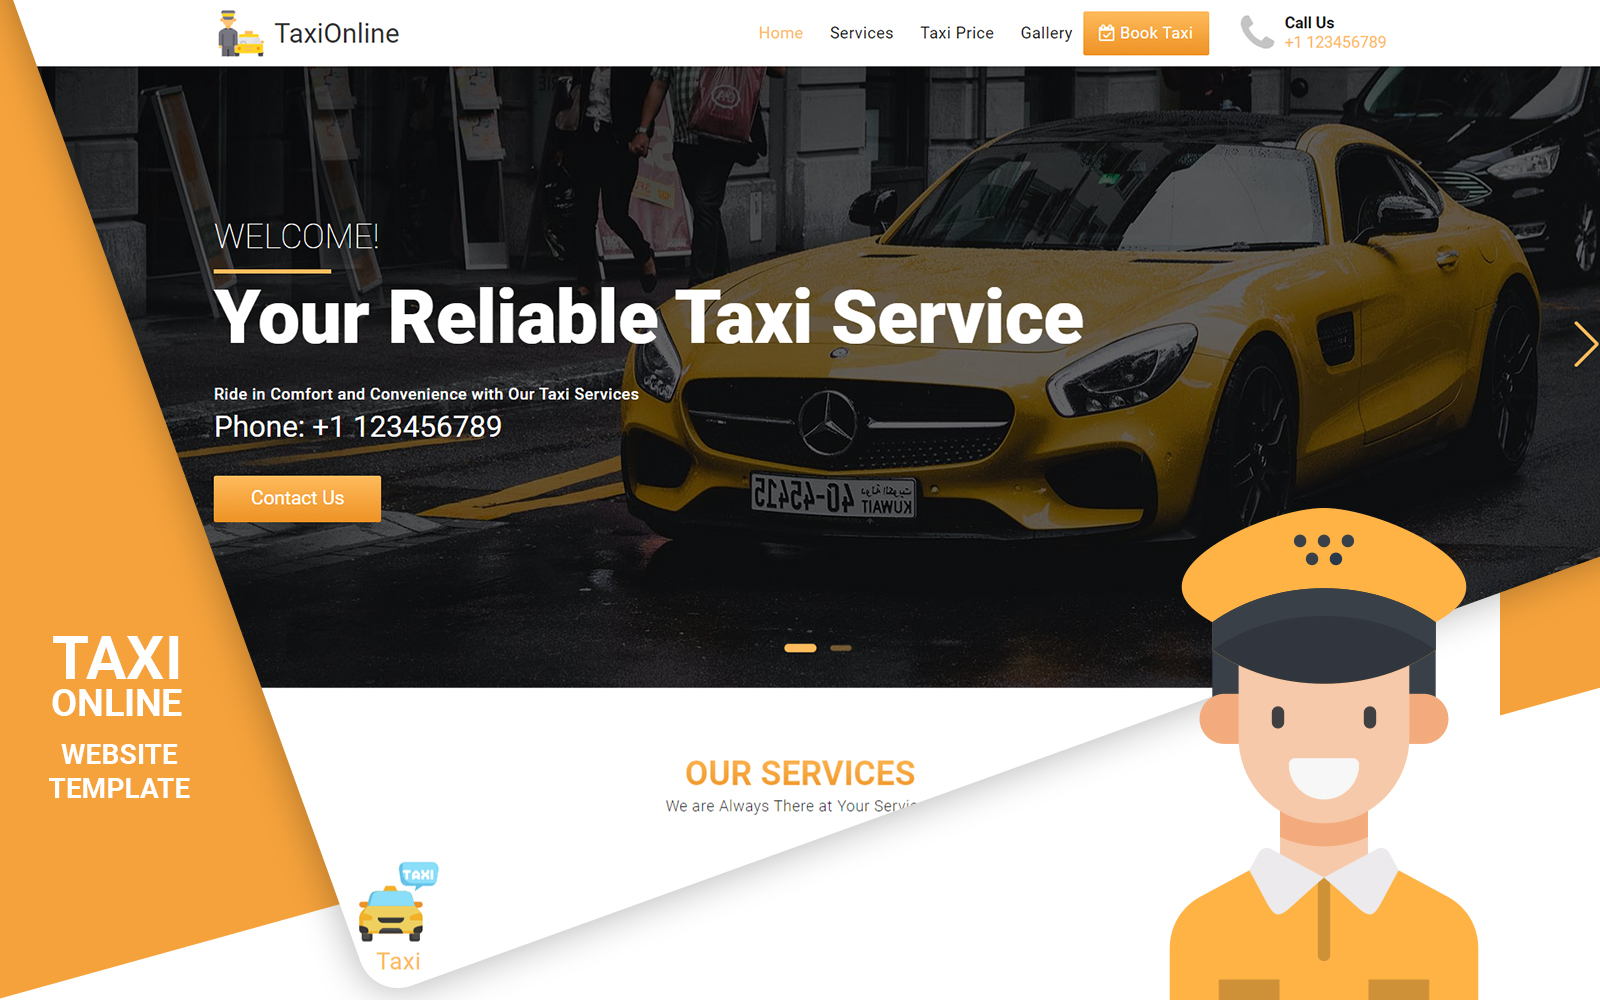 TaxiOnline - Taxi Booking Landing Page Template